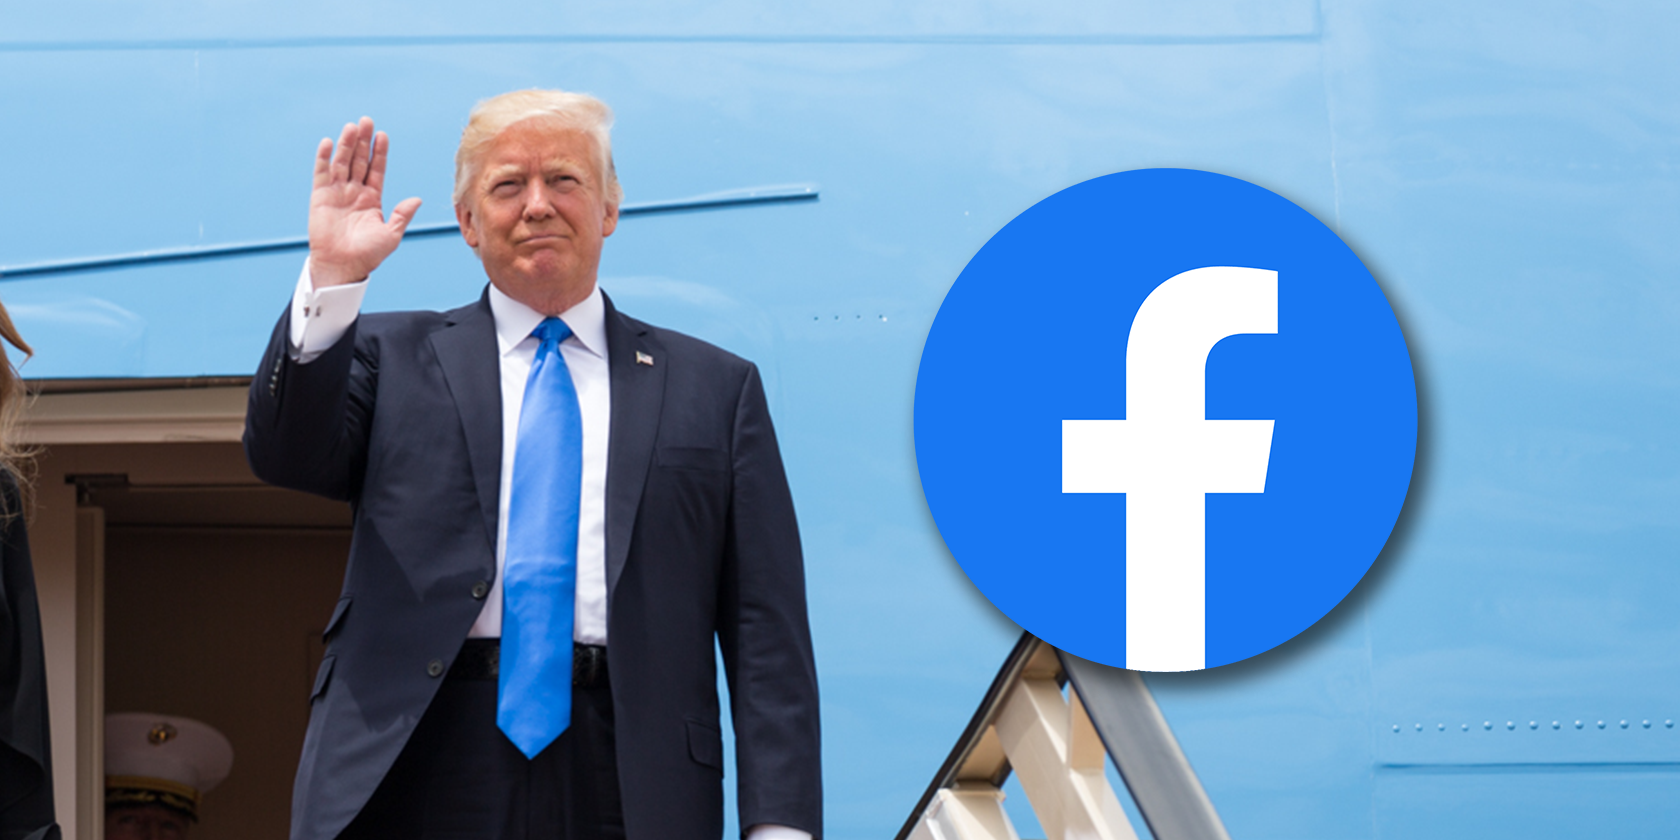 Former US president Trump and the Facebook logo